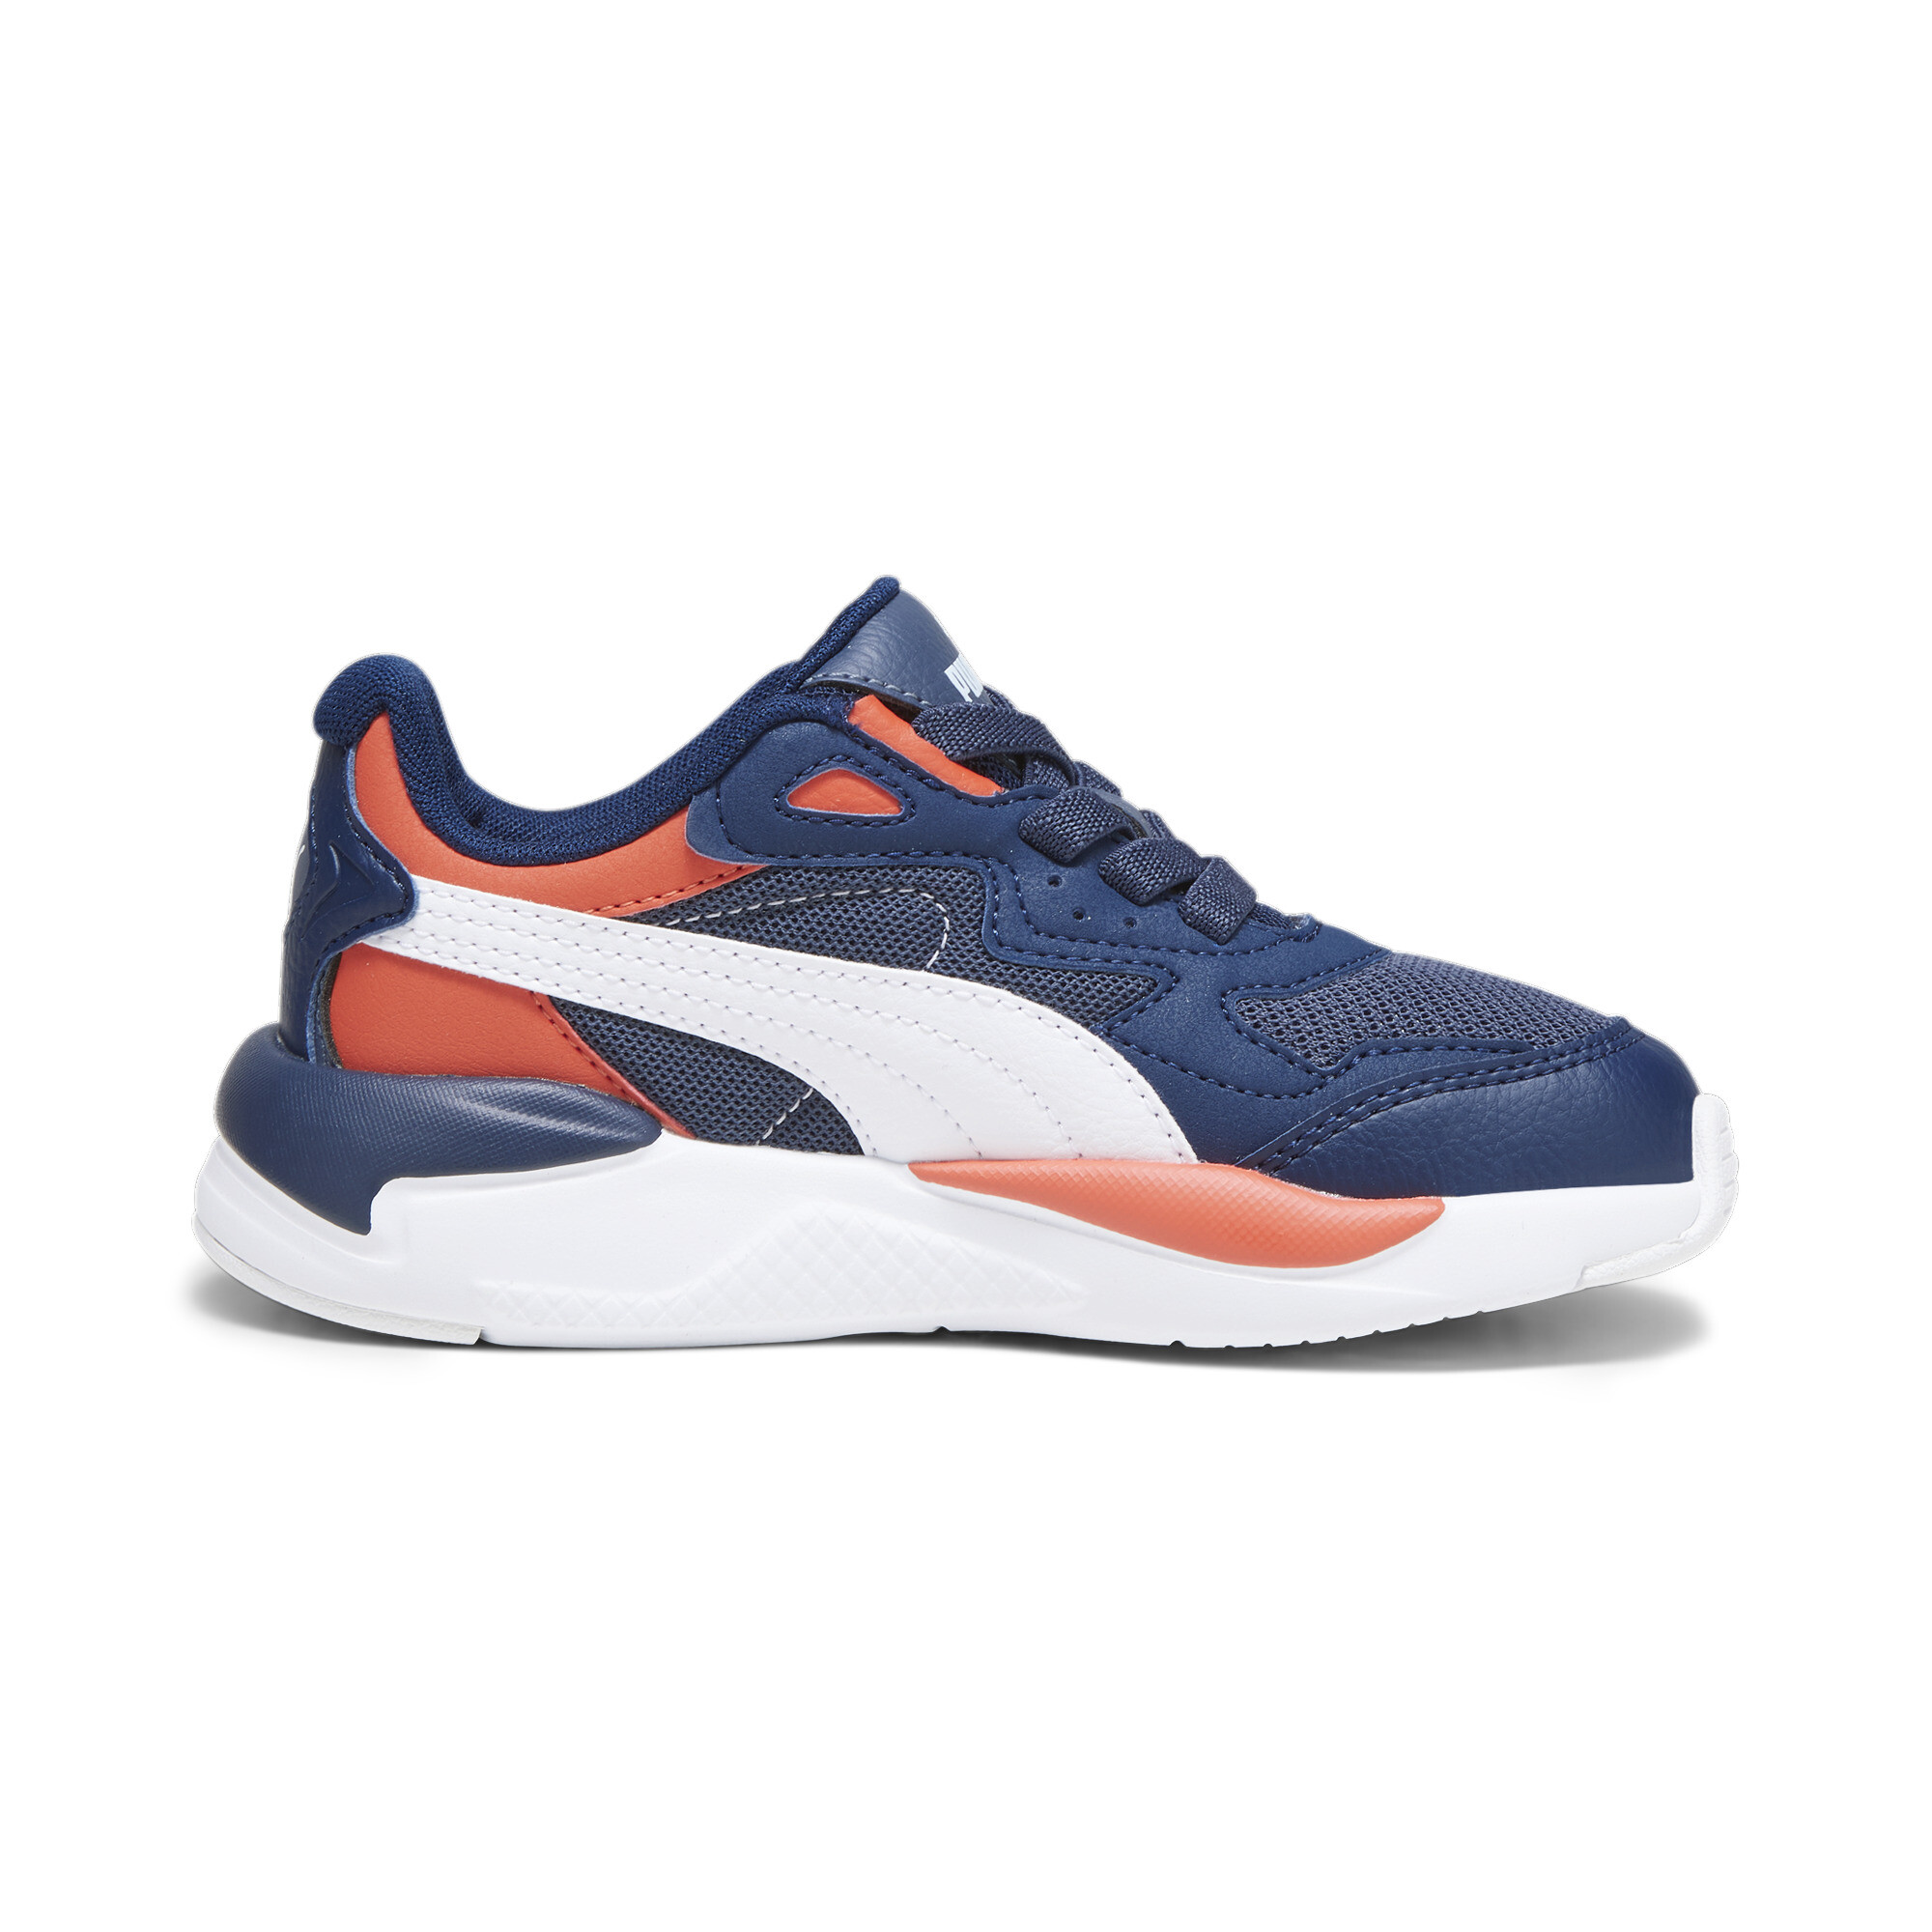 Puma X-Ray Speed AC Kids' Trainers, Blue, Size 32, Shoes